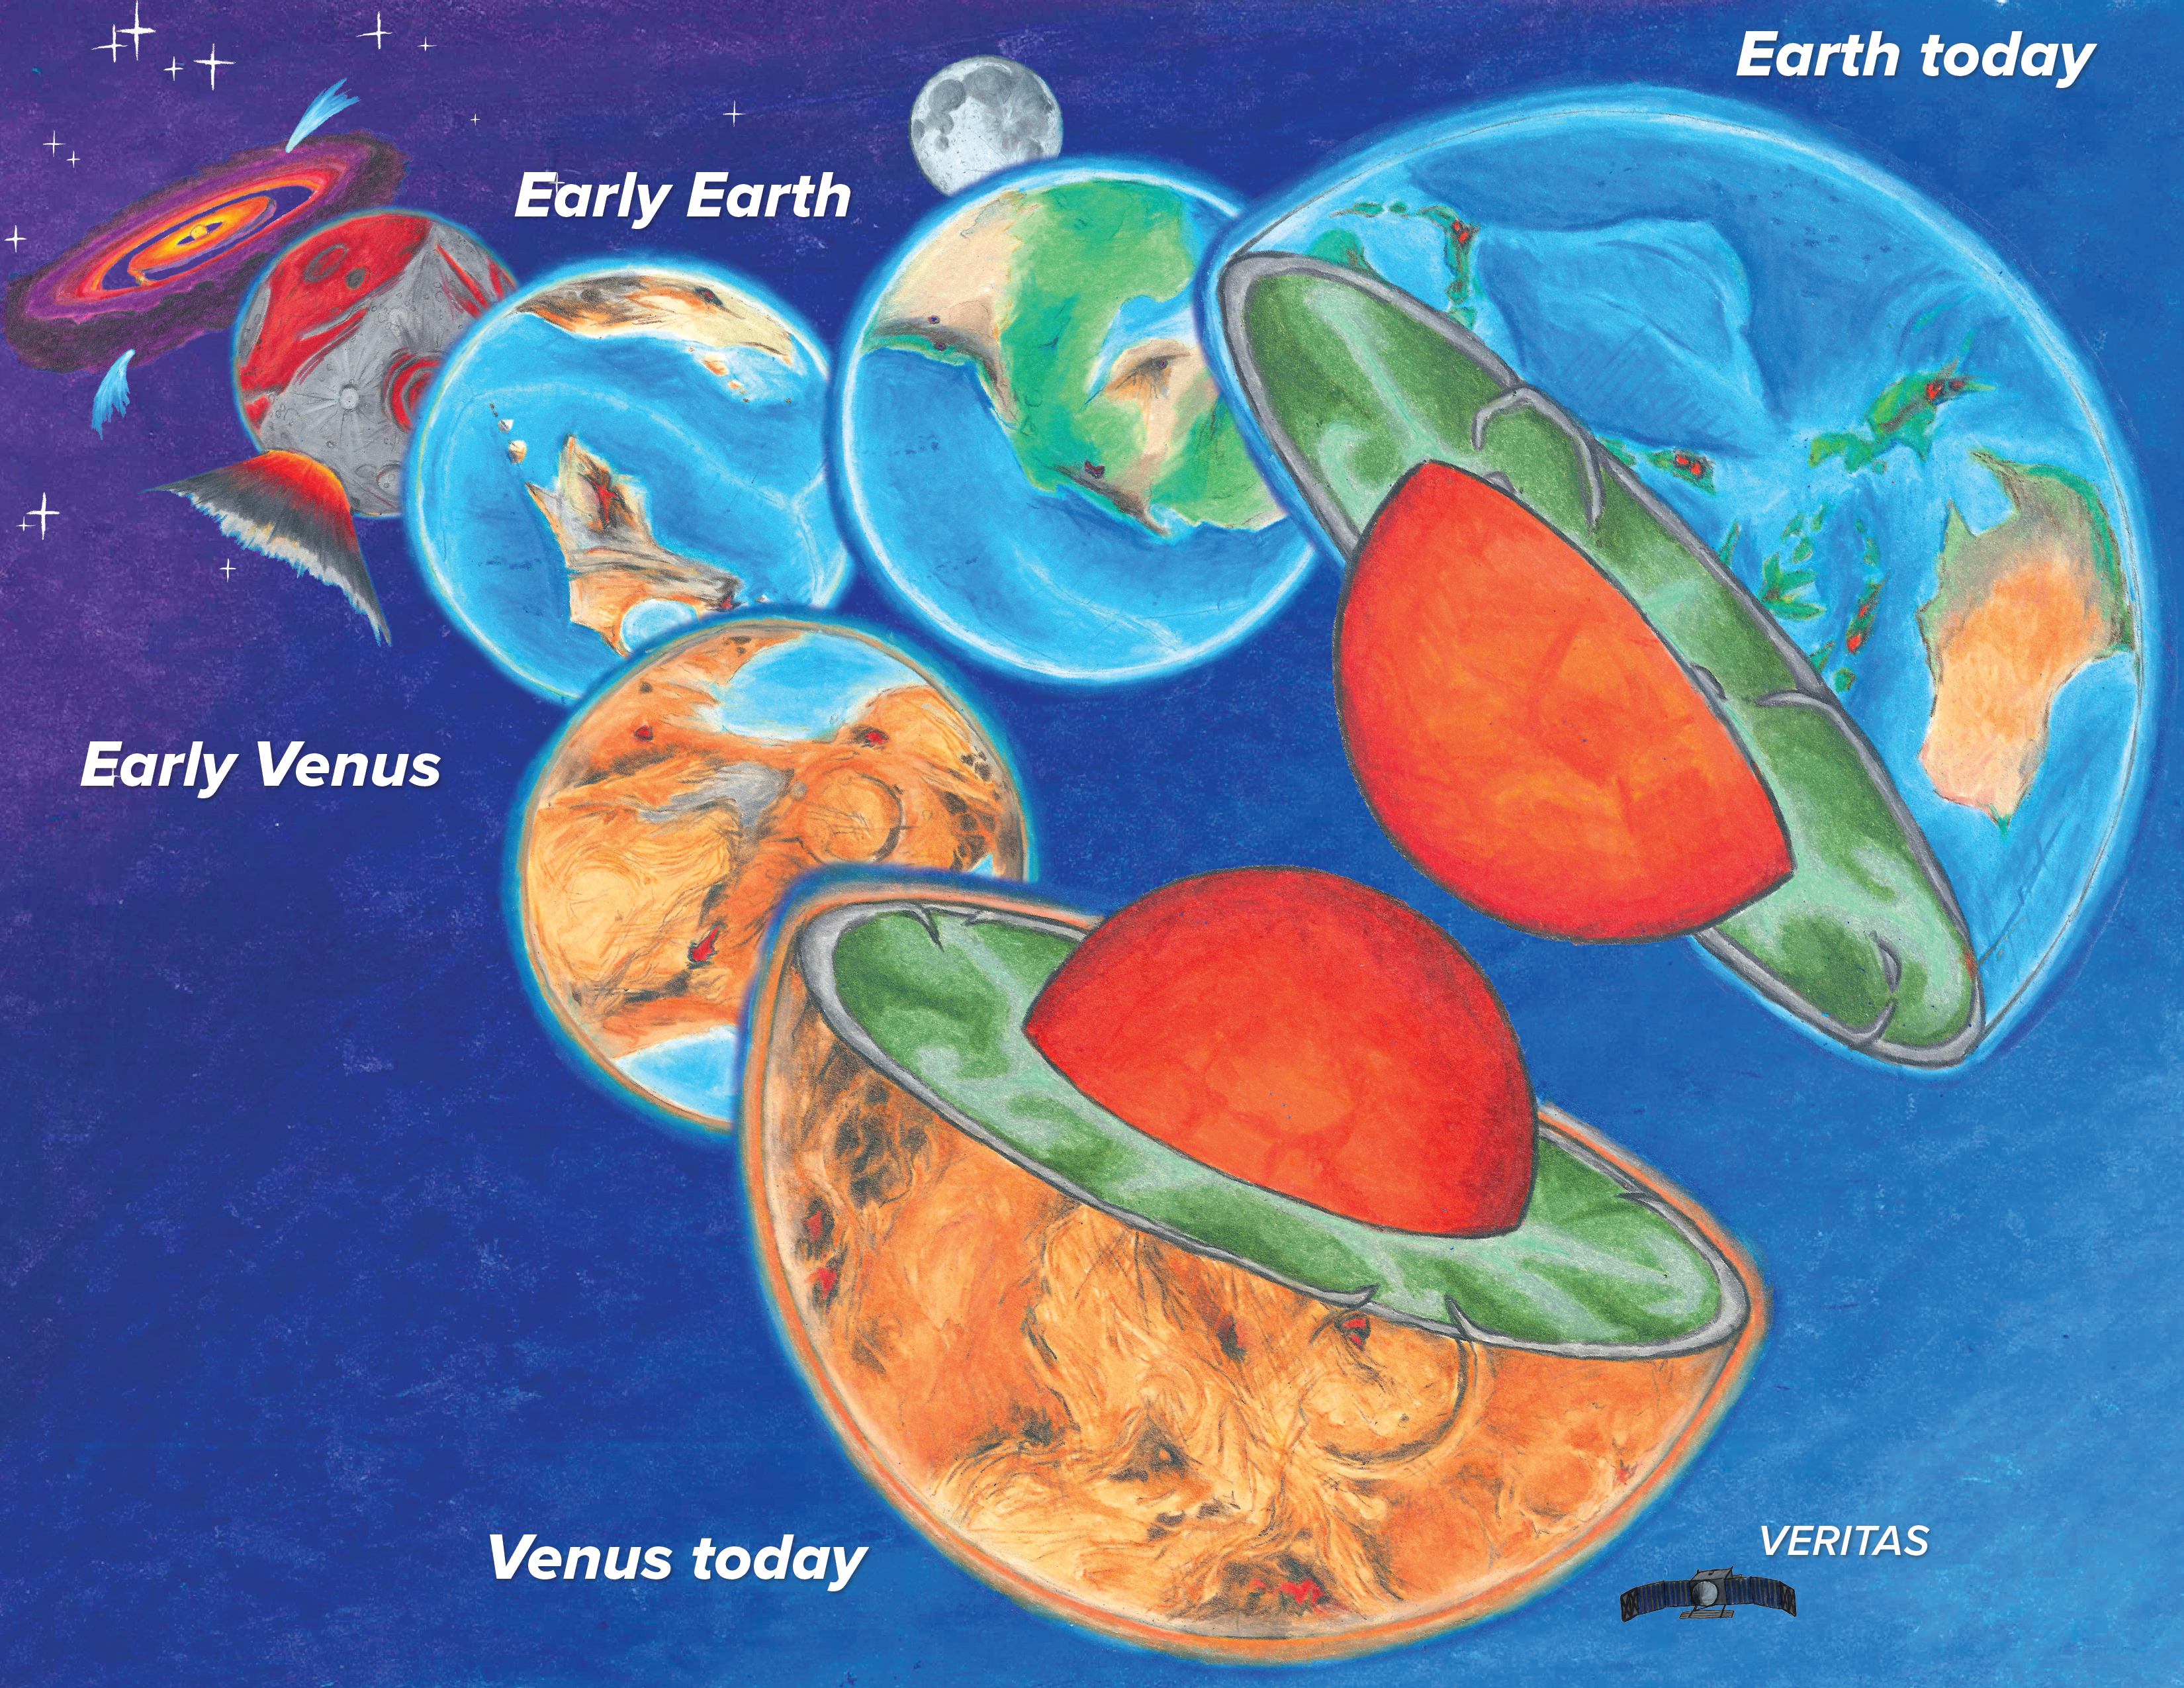 Illustration showing the divergent evolution of Earth and Venus through time. They start off similar and Venus becomes dryer over time.